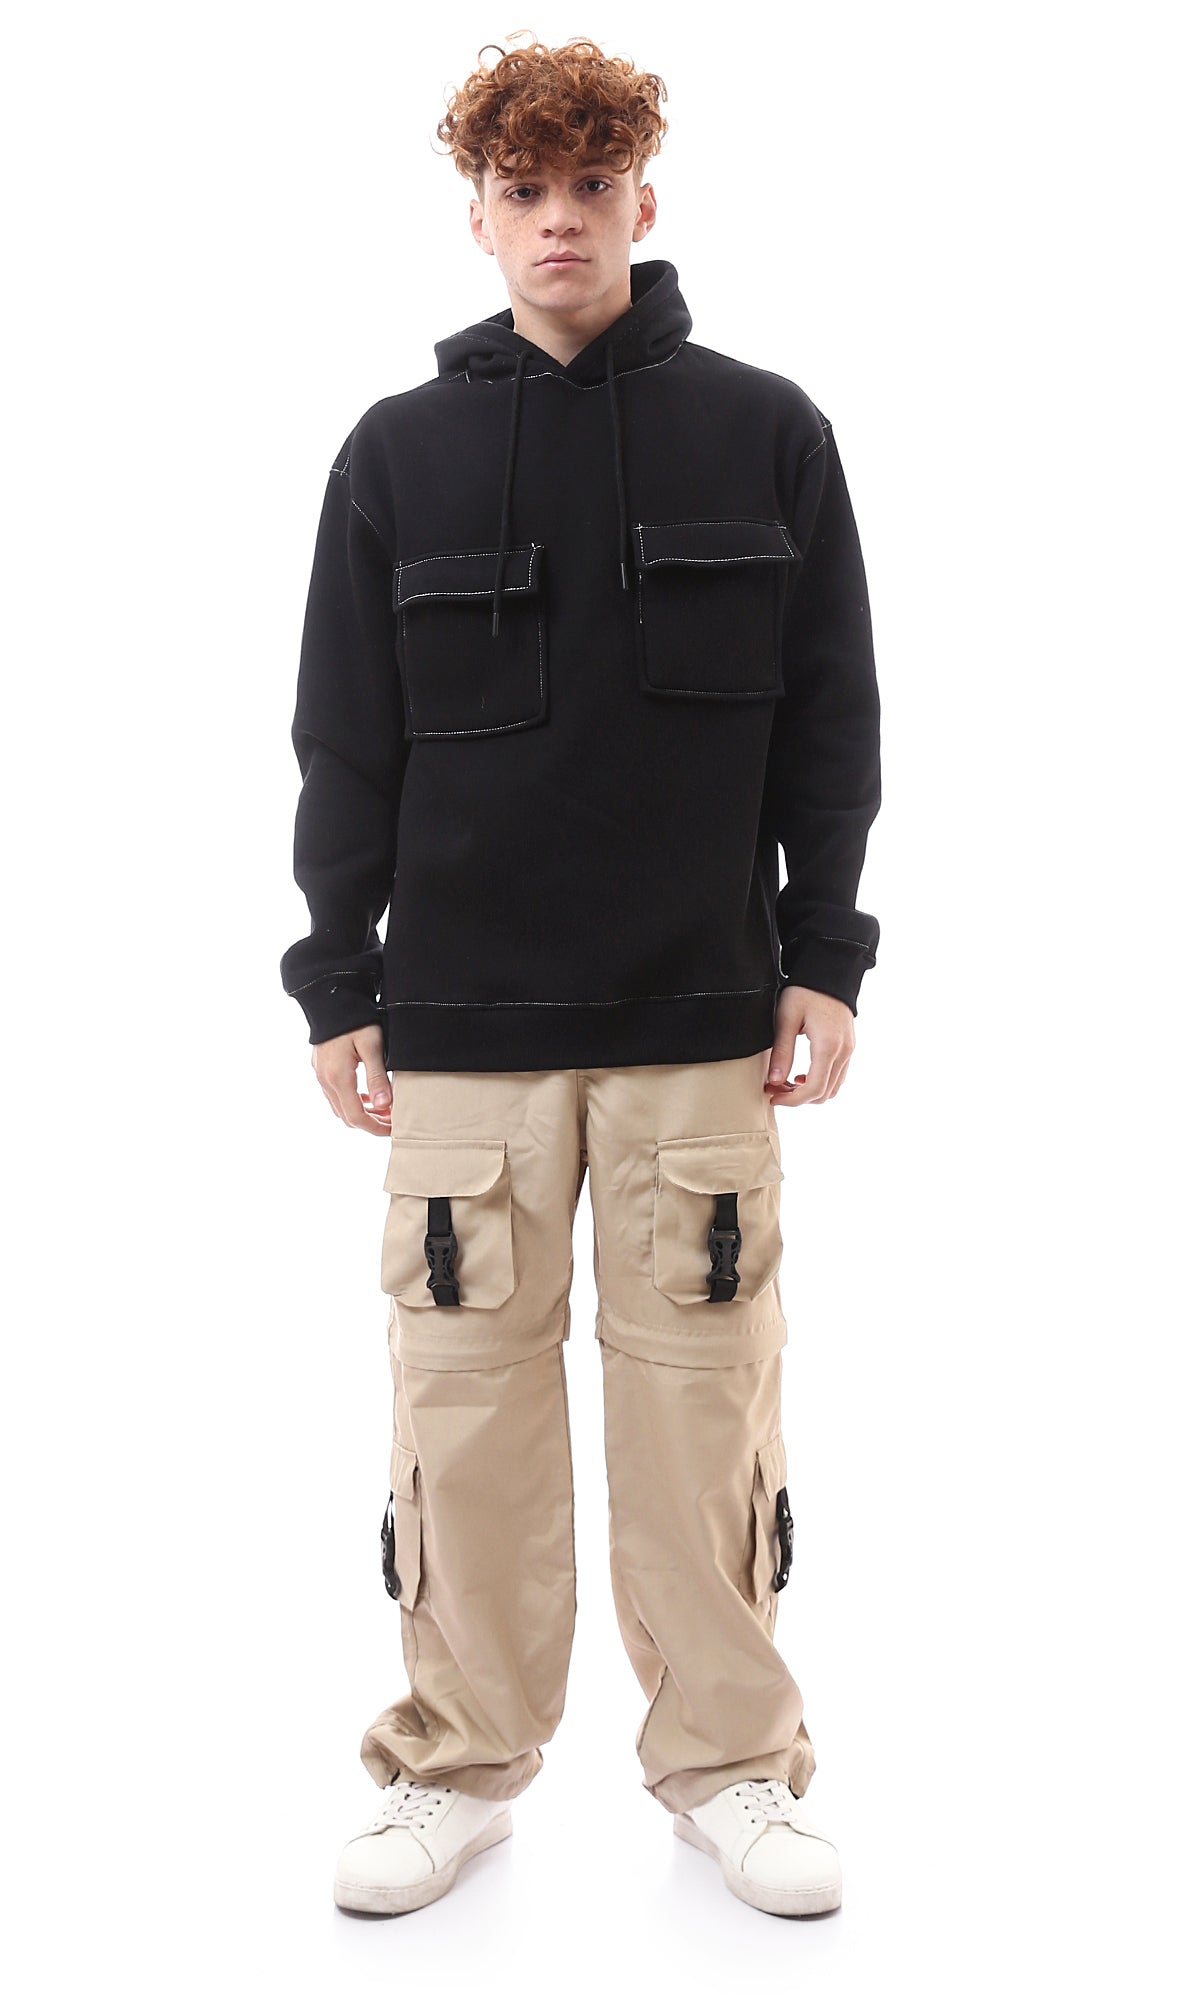 O175339 Front Patched Pockets Black Winter Hoodie